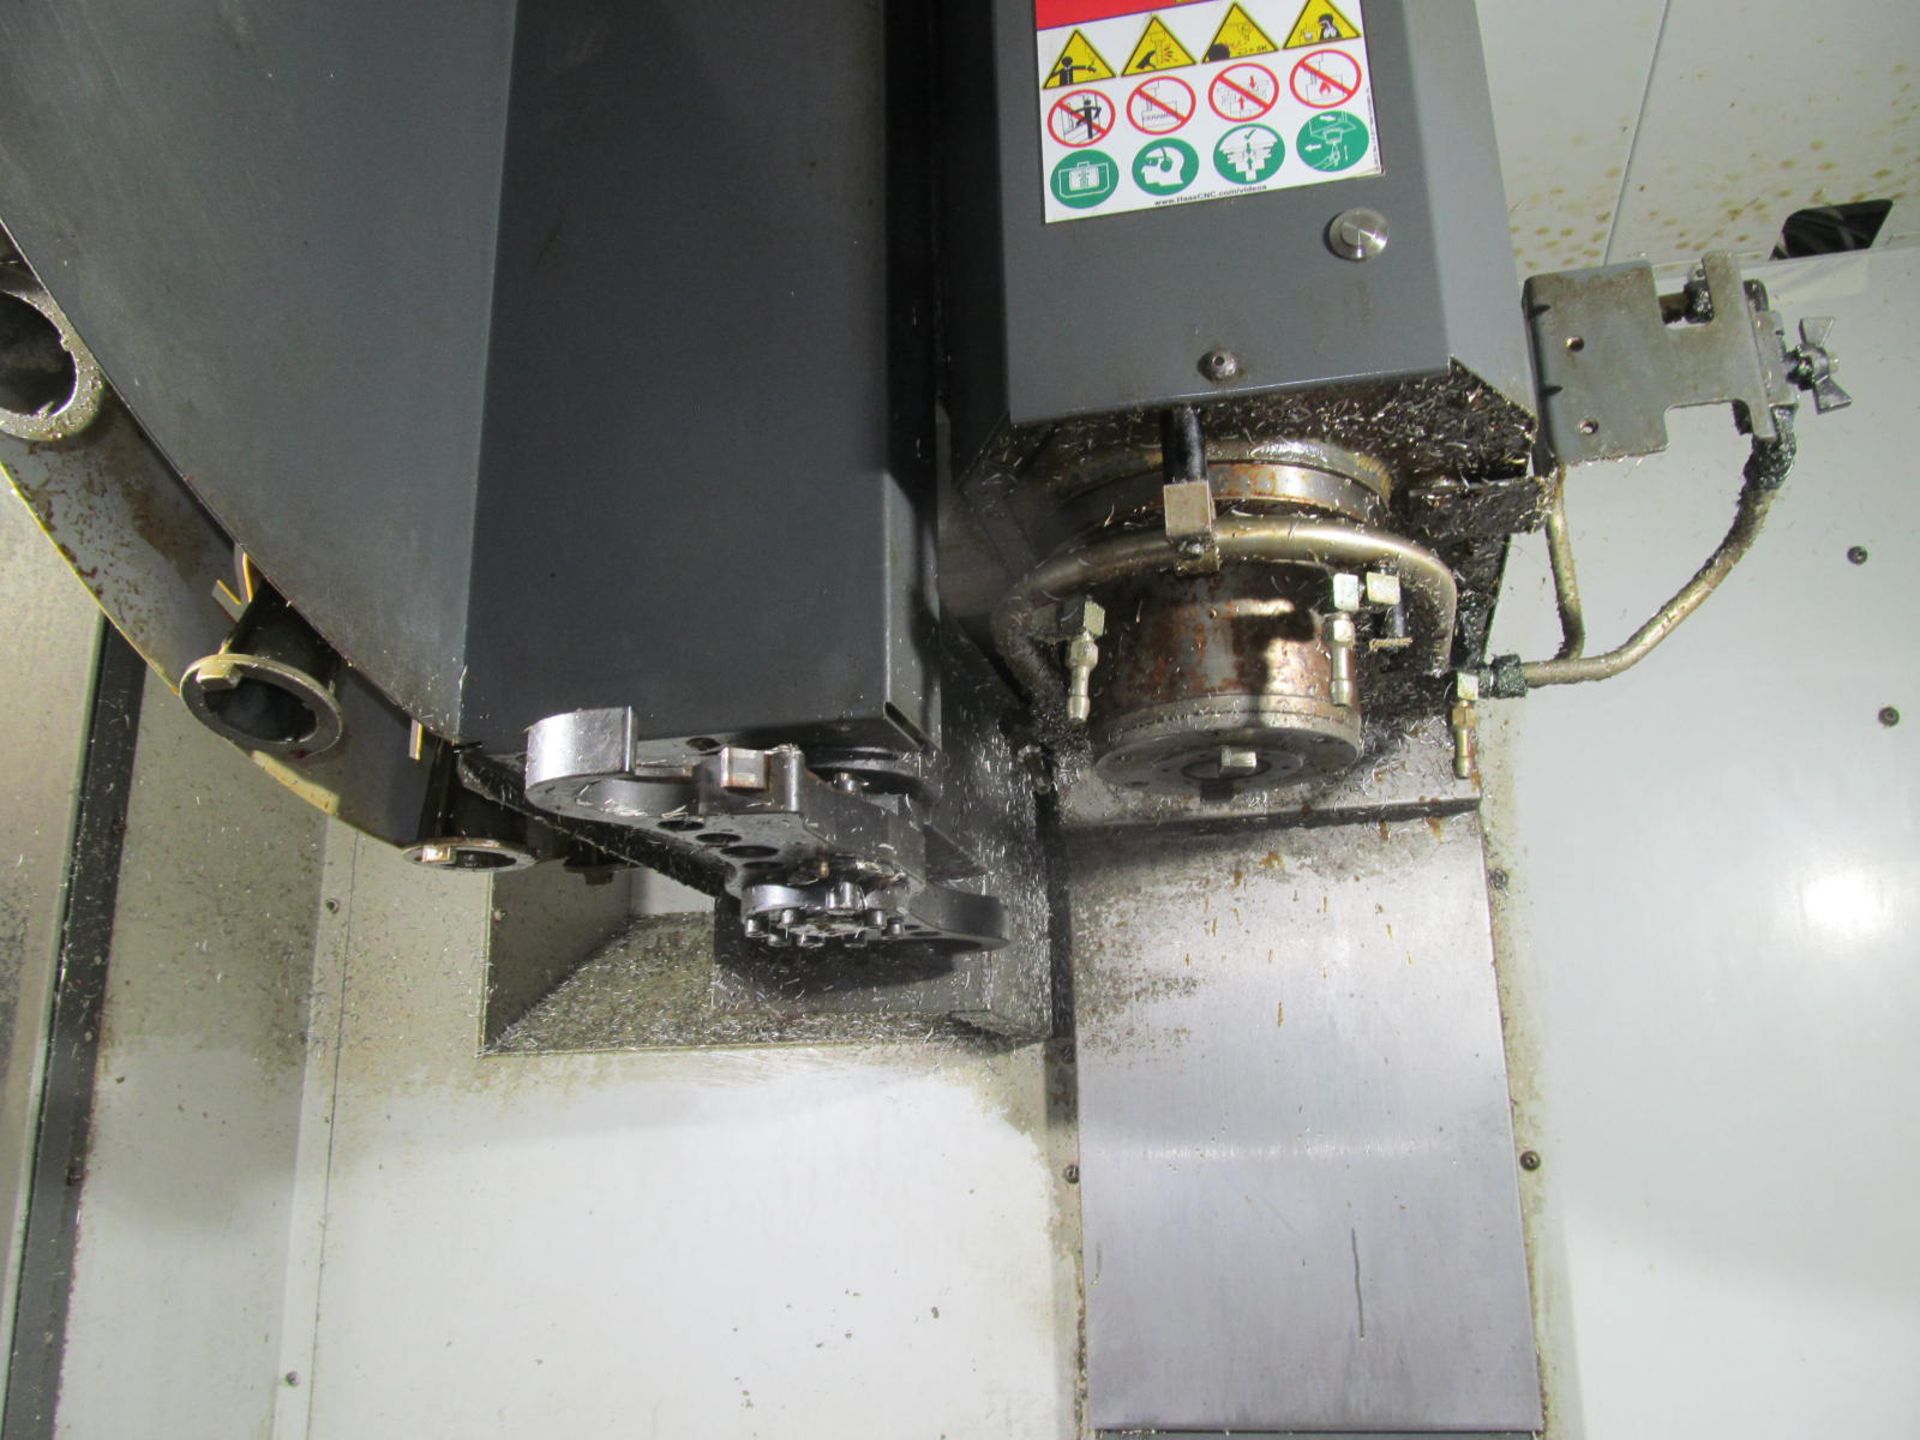 Haas DM-1 High-Performance CNC Drill/Mill Center - Image 5 of 8